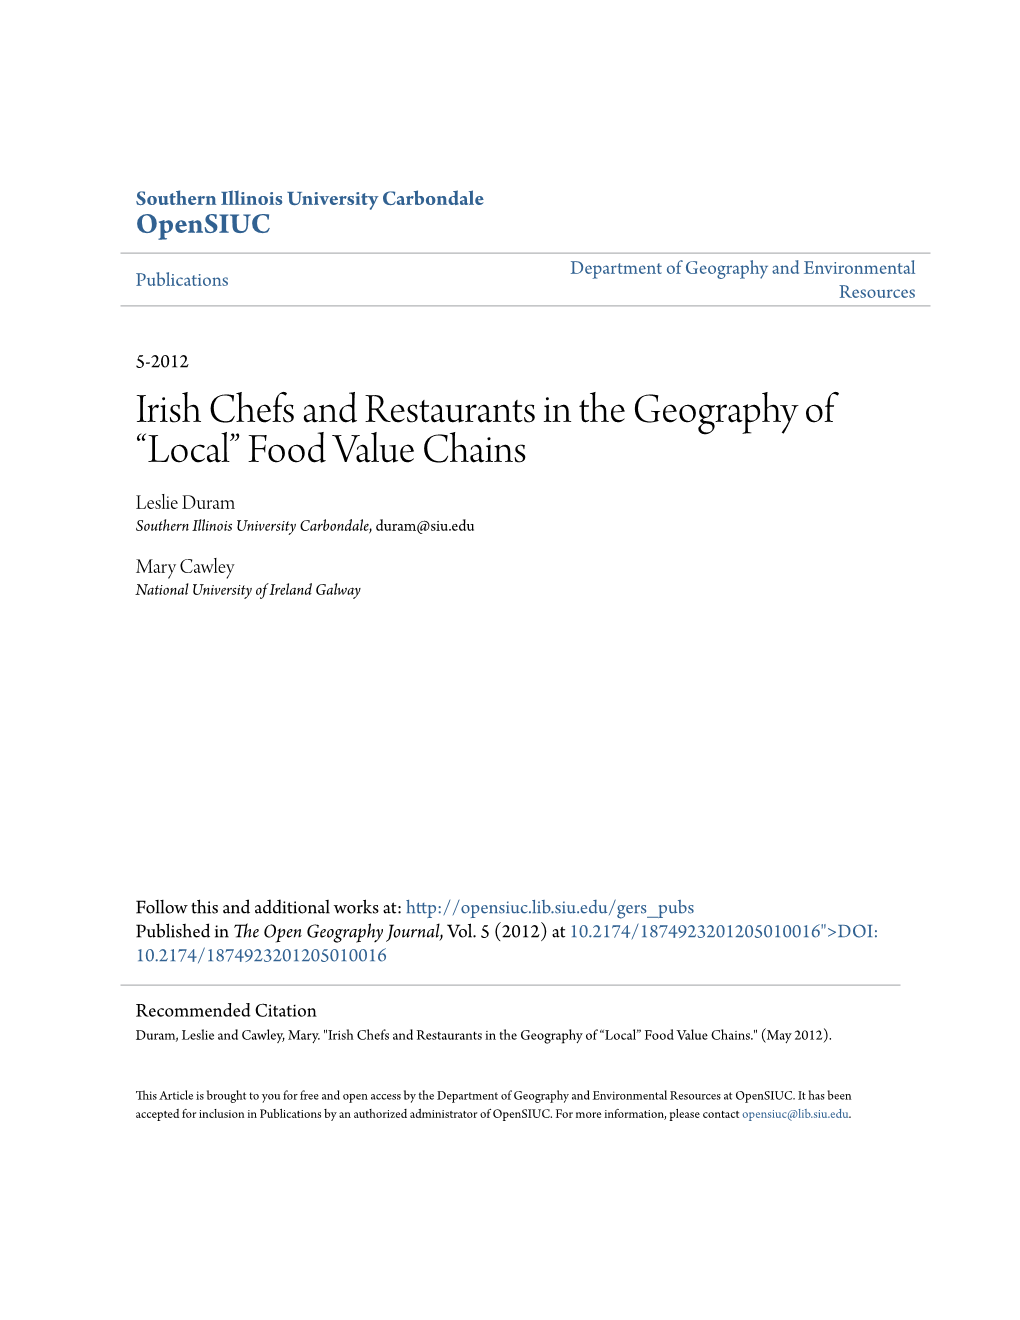 Irish Chefs and Restaurants in the Geography of “Local” Food Value Chains Leslie Duram Southern Illinois University Carbondale, Duram@Siu.Edu